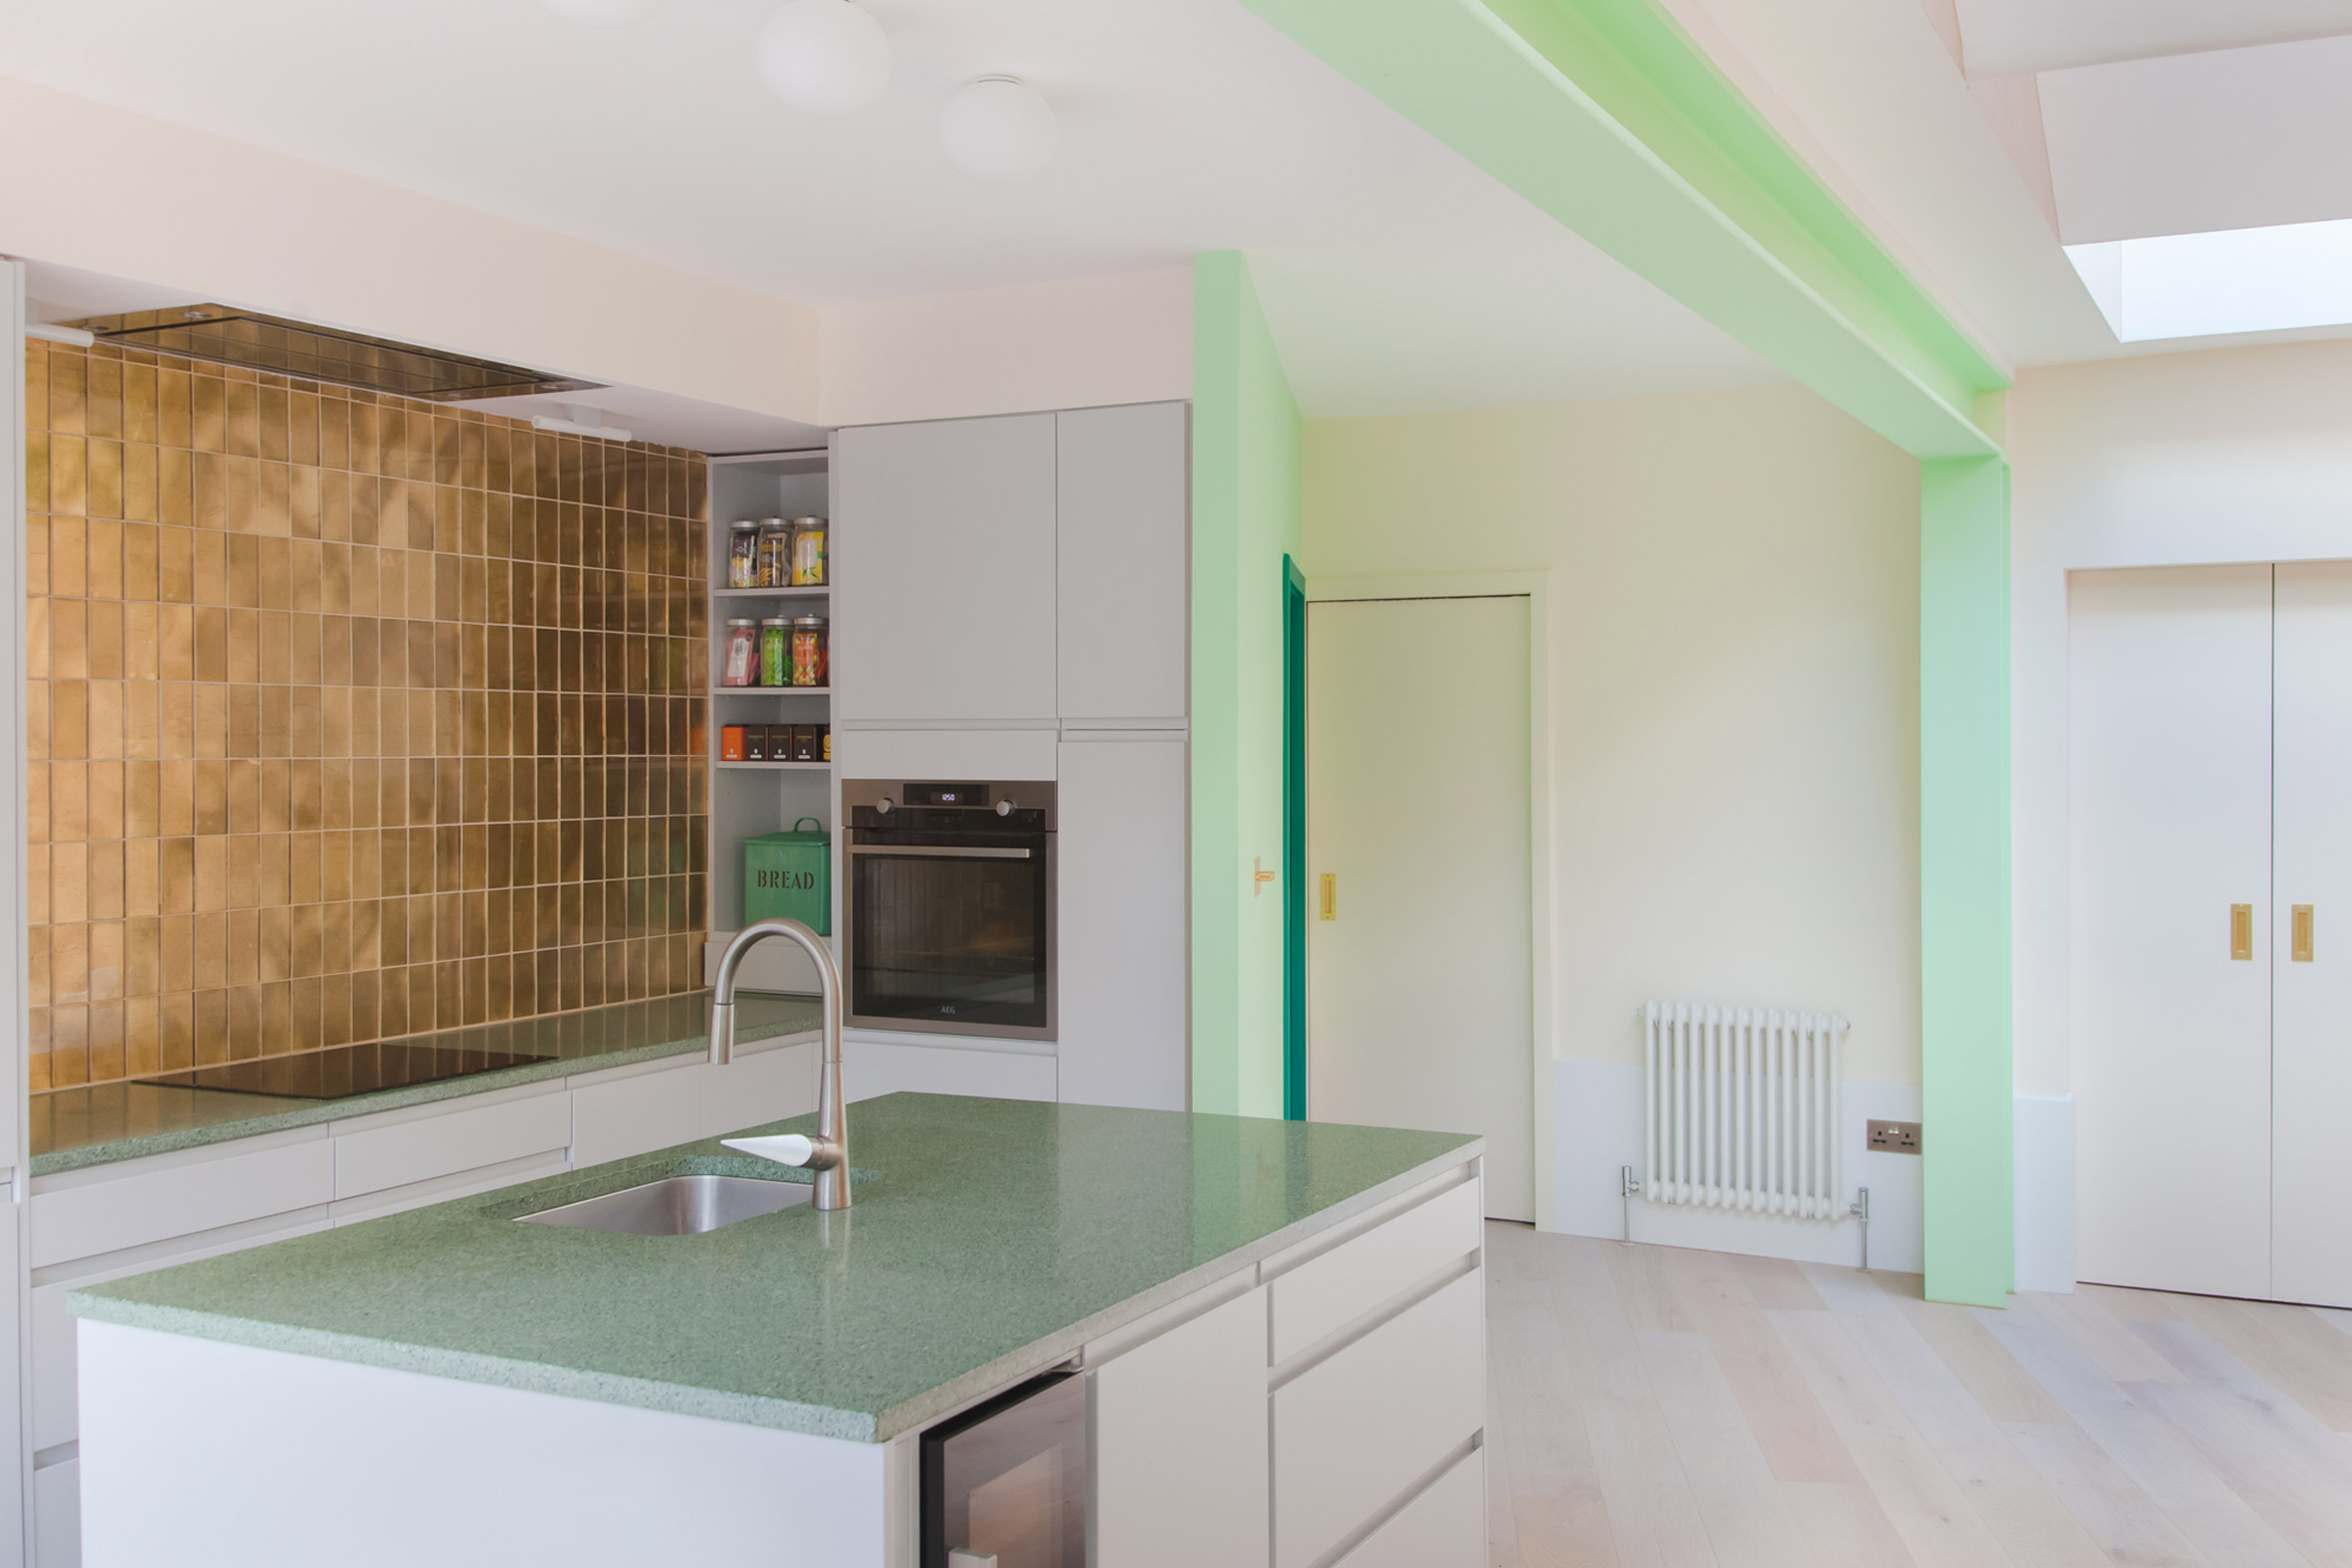 A bright white kitchen with green and gold detailing